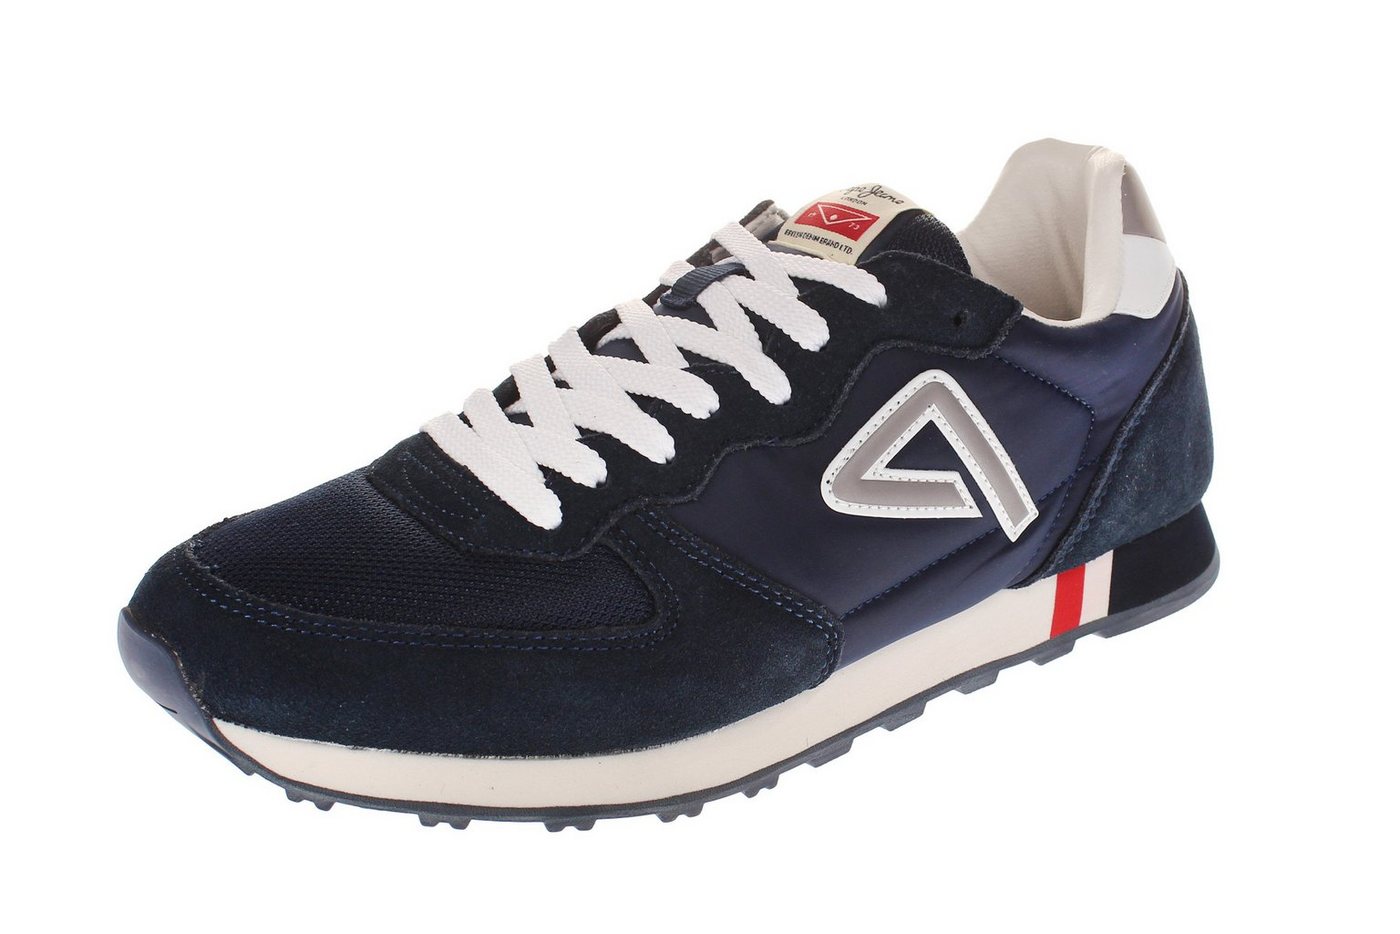 Pepe Jeans pms 30592-595navy-45 Sneaker von Pepe Jeans